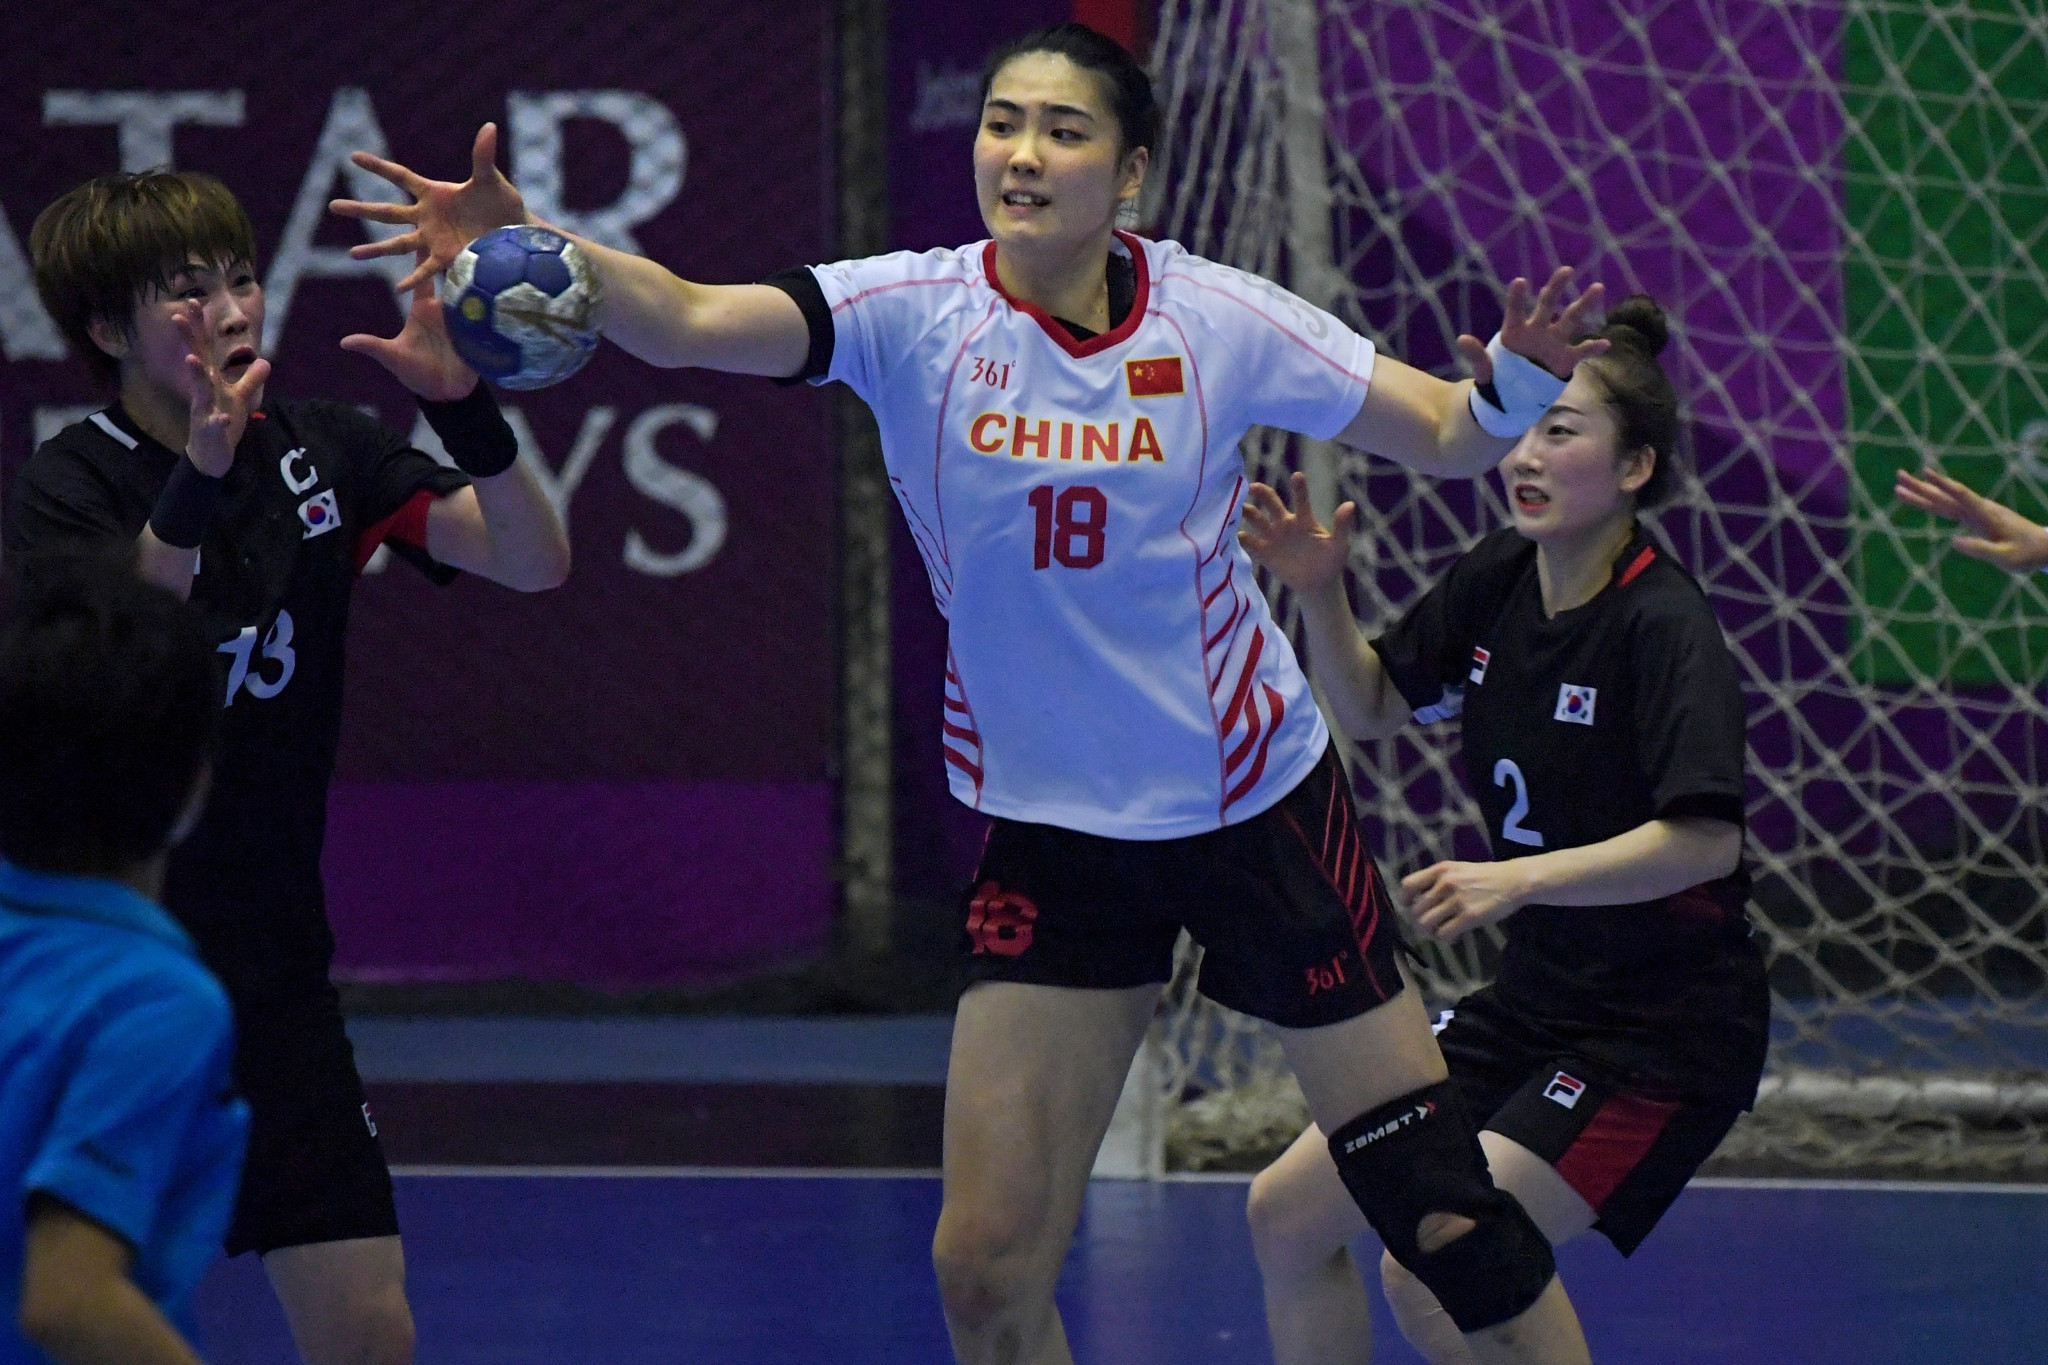 A team made up of only Chinese players is expected to join the Russian Women’s Handball Super League ©Getty Images